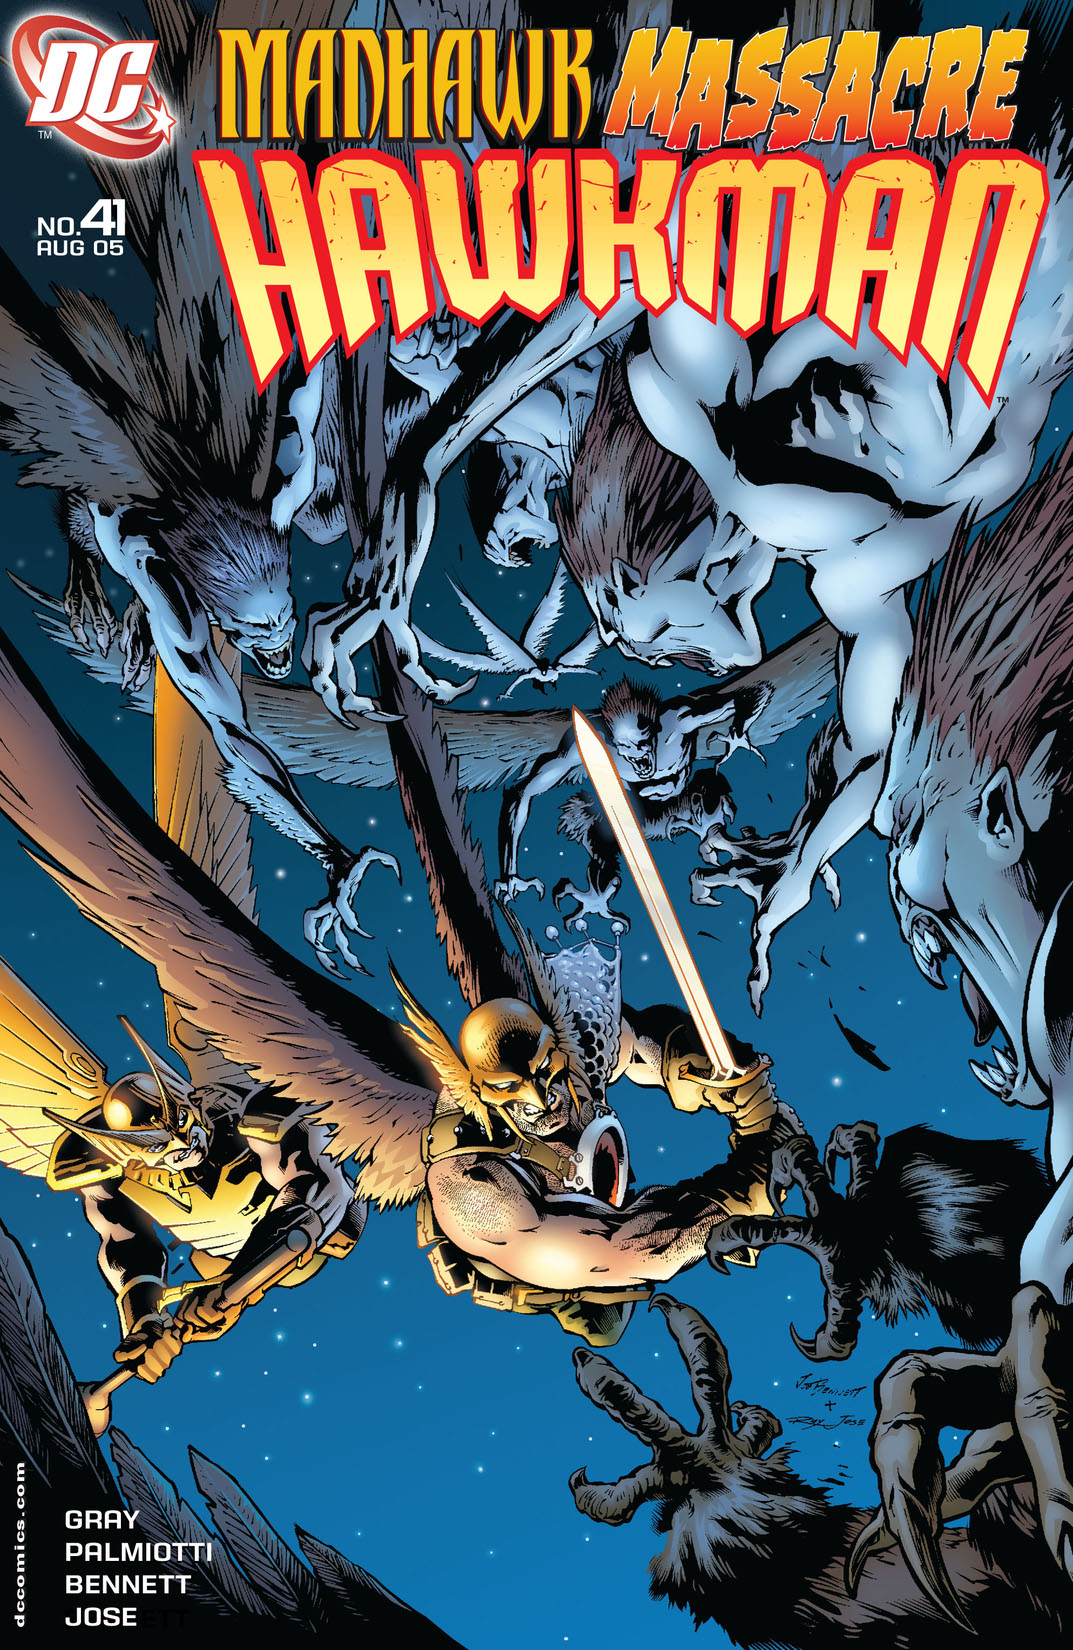 Hawkman (2002-) #41 preview images